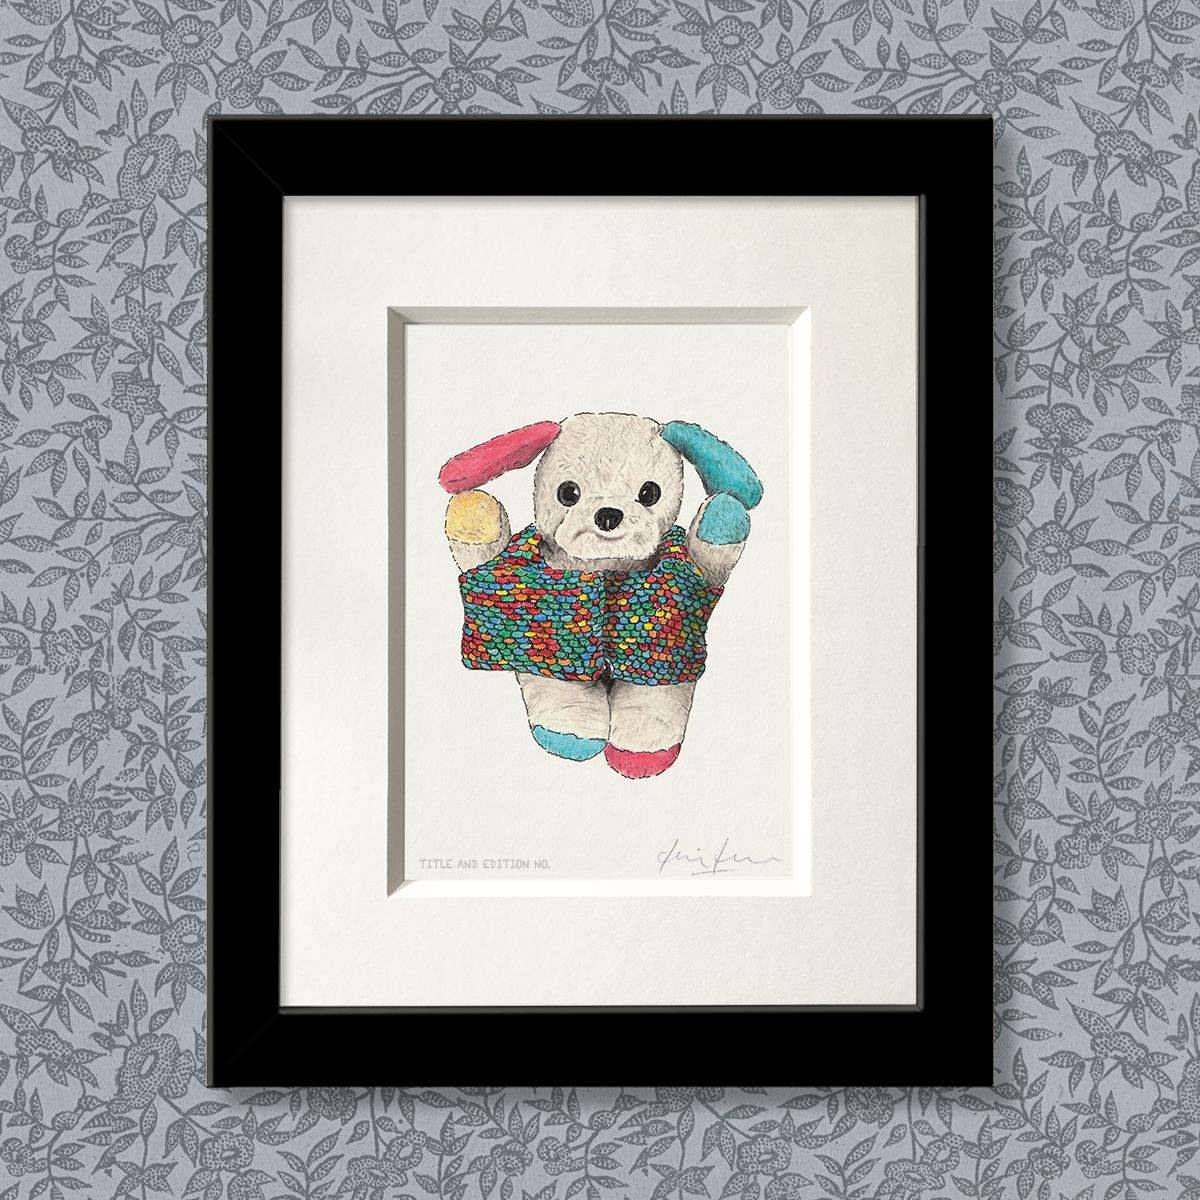 Limited edition print from a pen, ink and coloured pencil drawing of a soft toy in a knitted sweater in a black frame